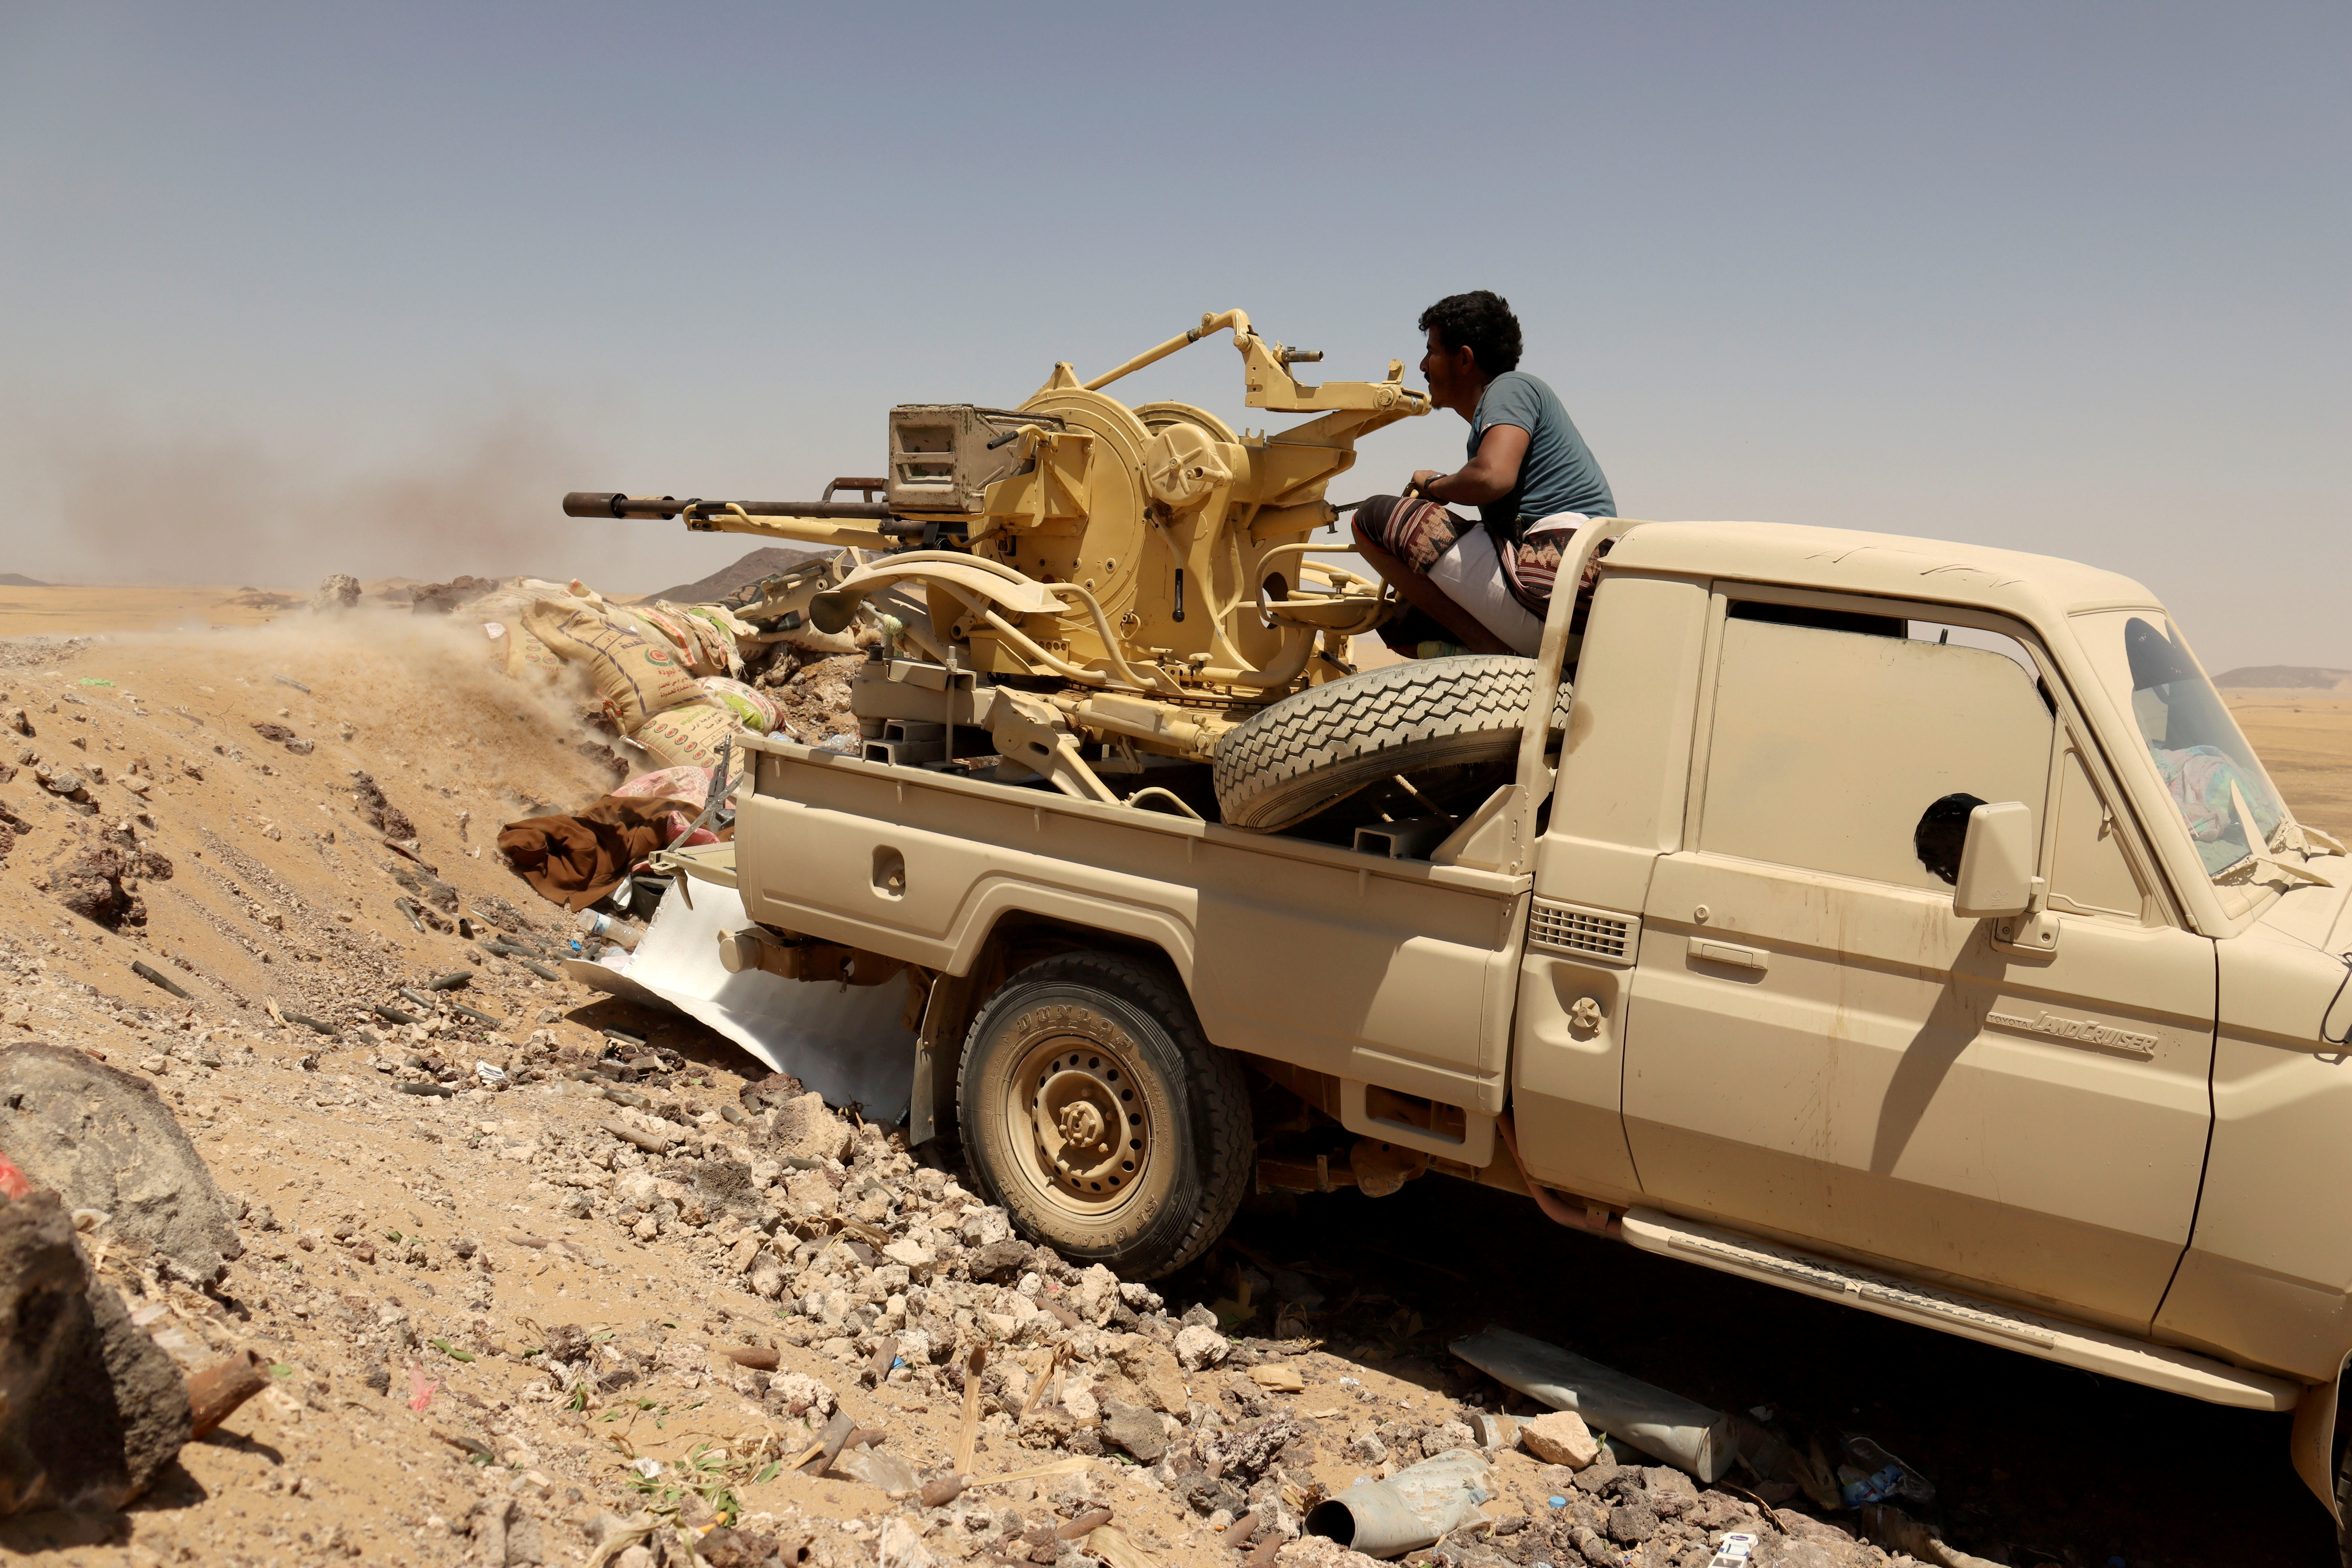 A Yemeni government fighter fires a vehicle-mounted weapon at a frontline position during fighting against Houthi fighters in Marib